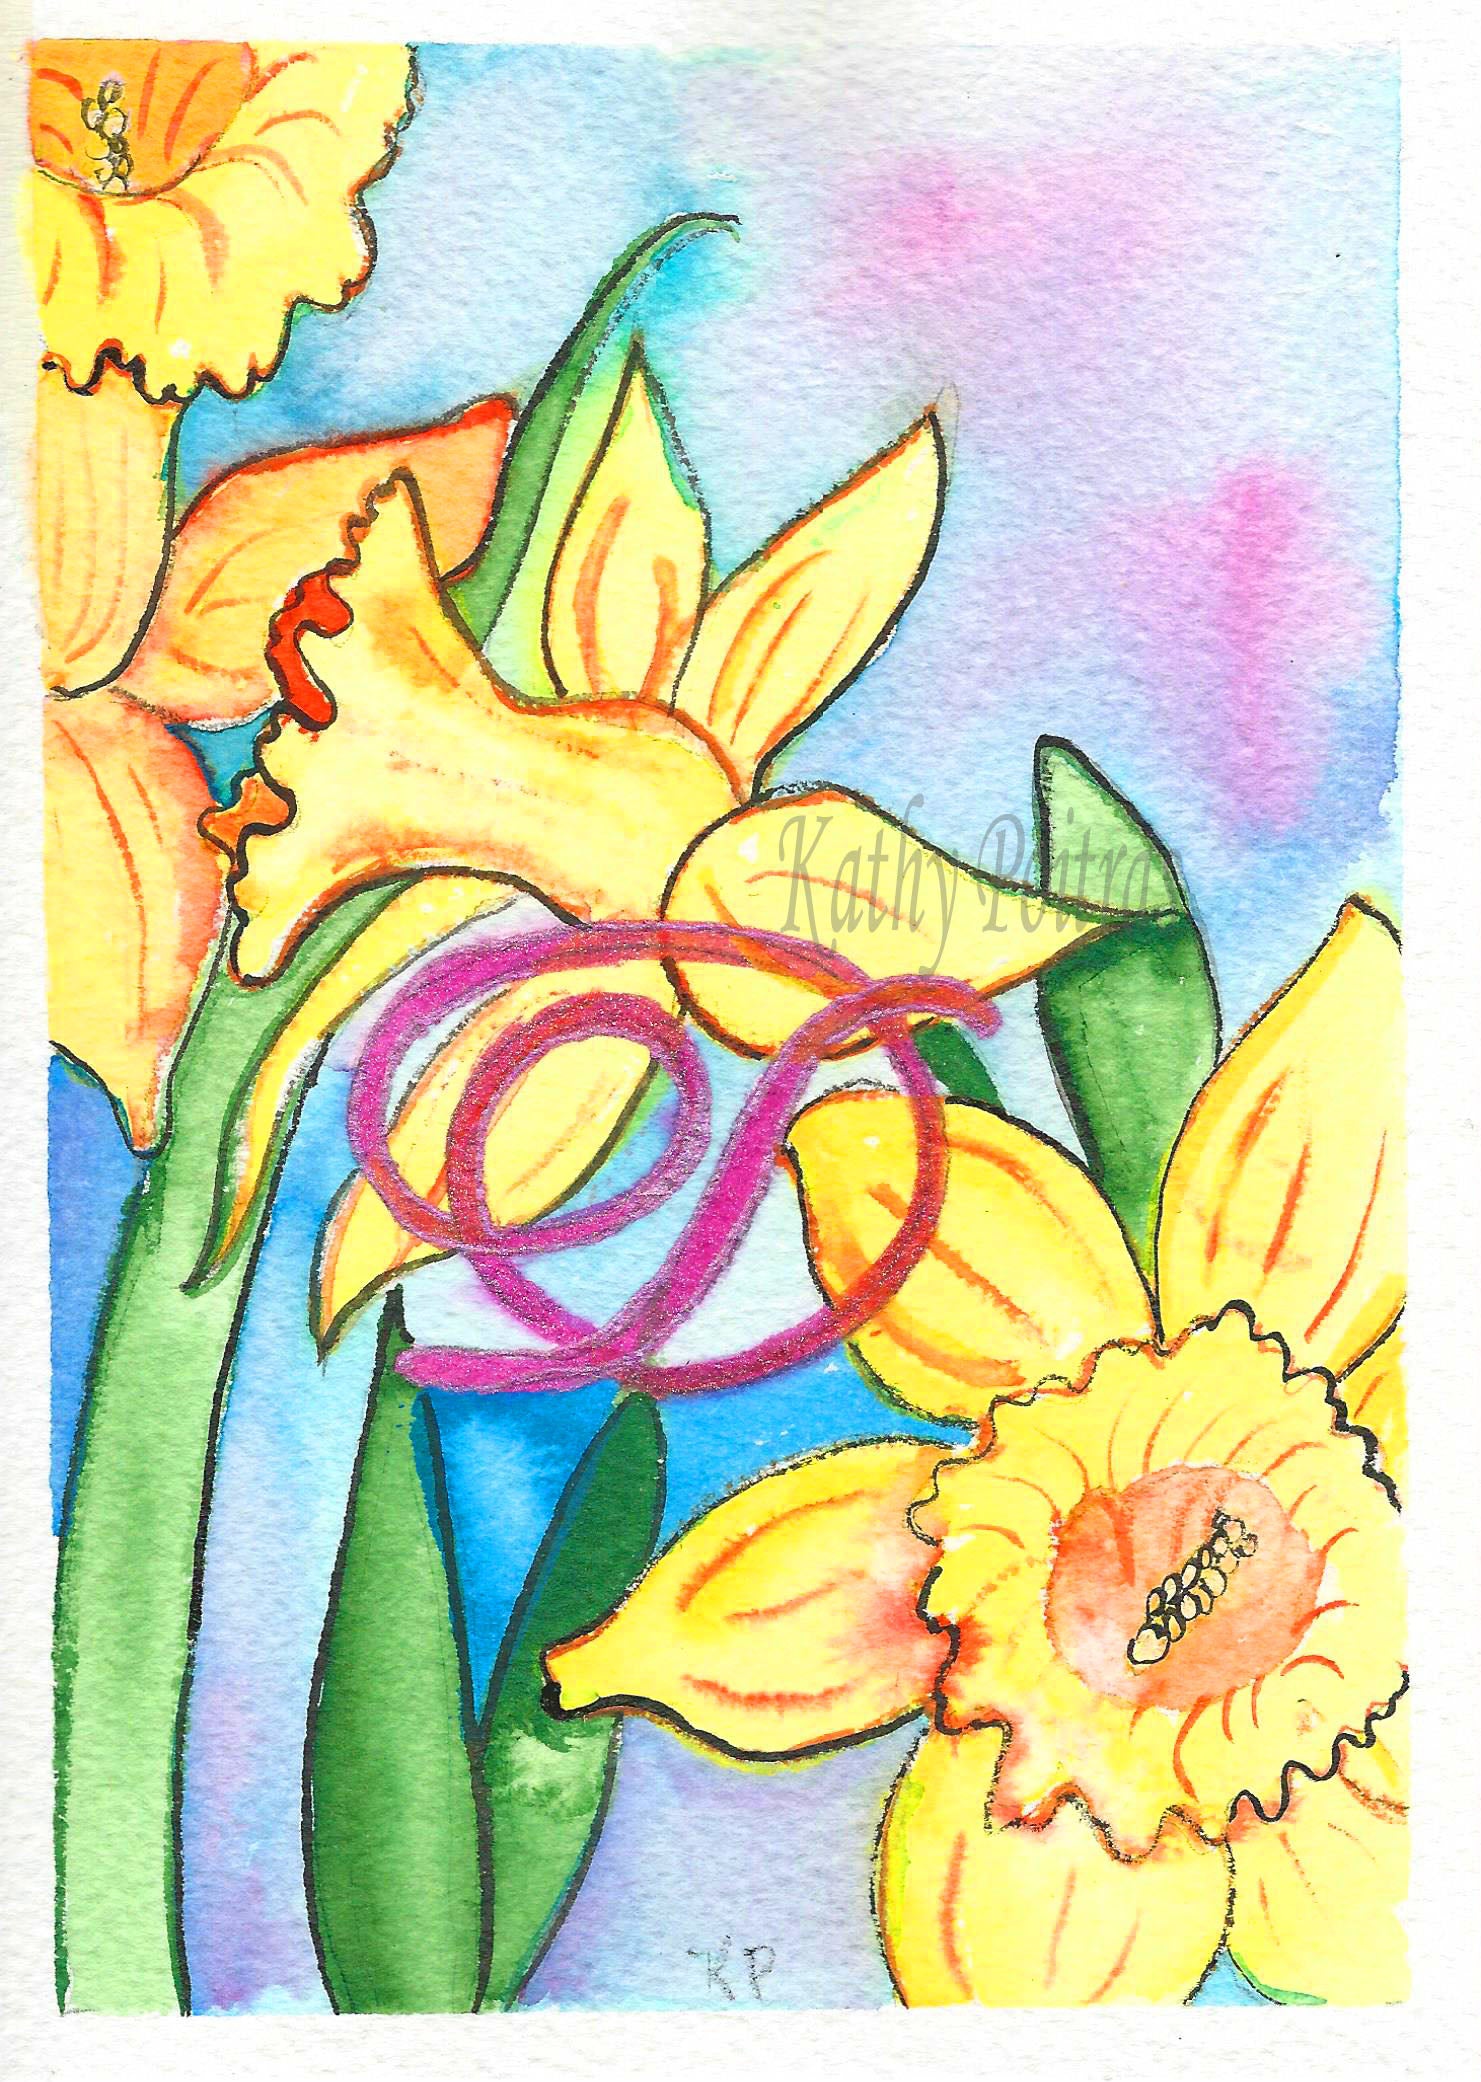 Greeting Card, Birthday Card, Mothers Day Card, Daffodils inspired by the birth flower of the month for March. Watercolor and ink.  This greeting card is an individual painting, watercolor and ink painted on arches 100% cotton paper.  personalized with a fancy letter D as part of the painting.  by artist Kathy Poitras.